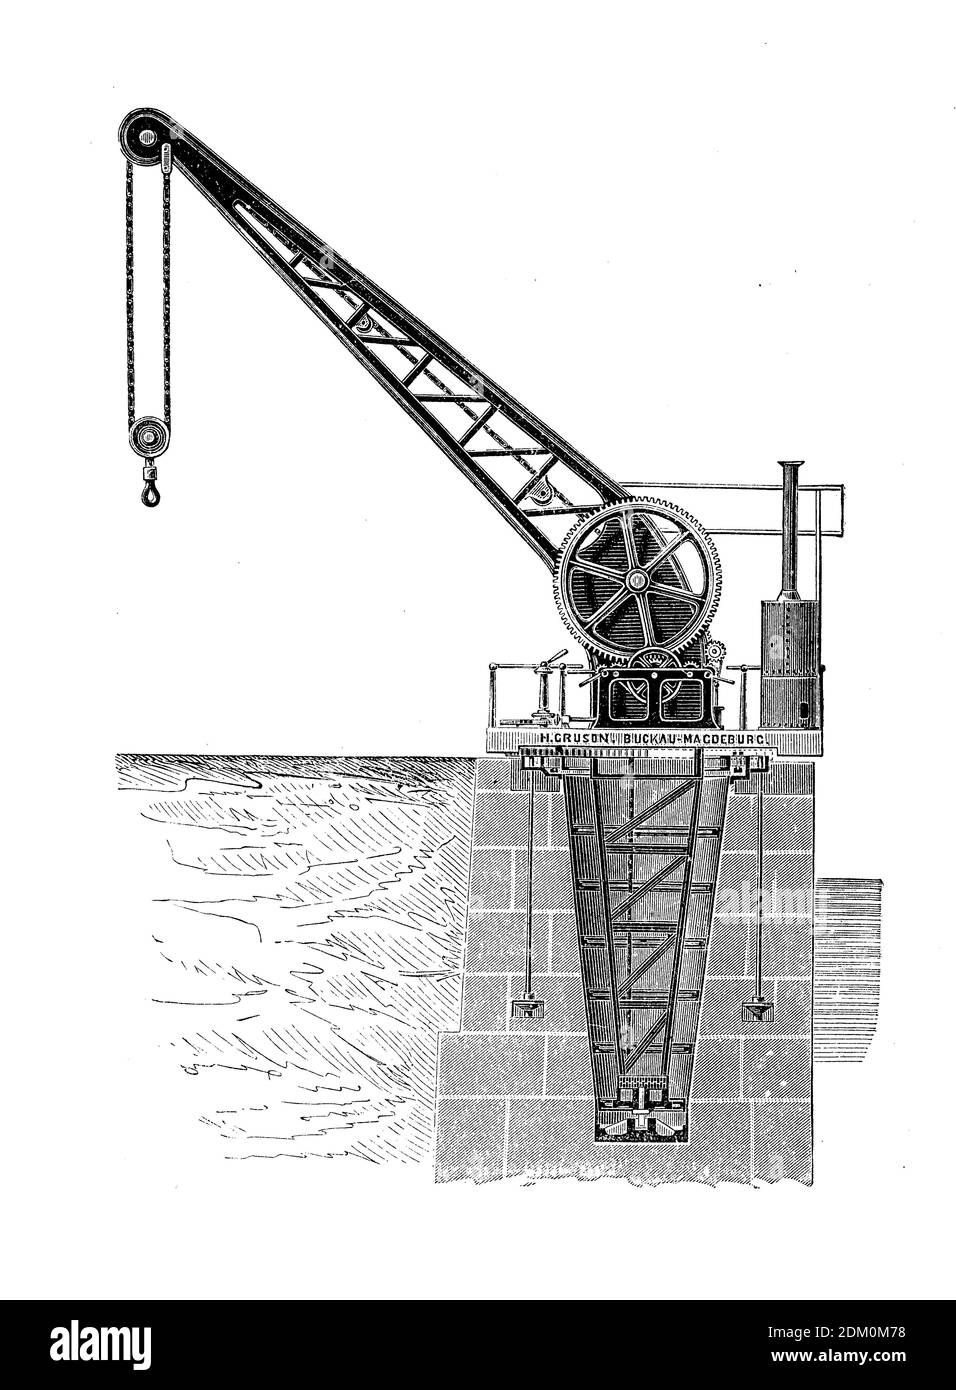 fixed rotary crane to load vessels from railway wagons, designed in the 19th century by Hermann Gruson's  machinery and shipbuilding workshop in Magdeburg, Germany Stock Photo